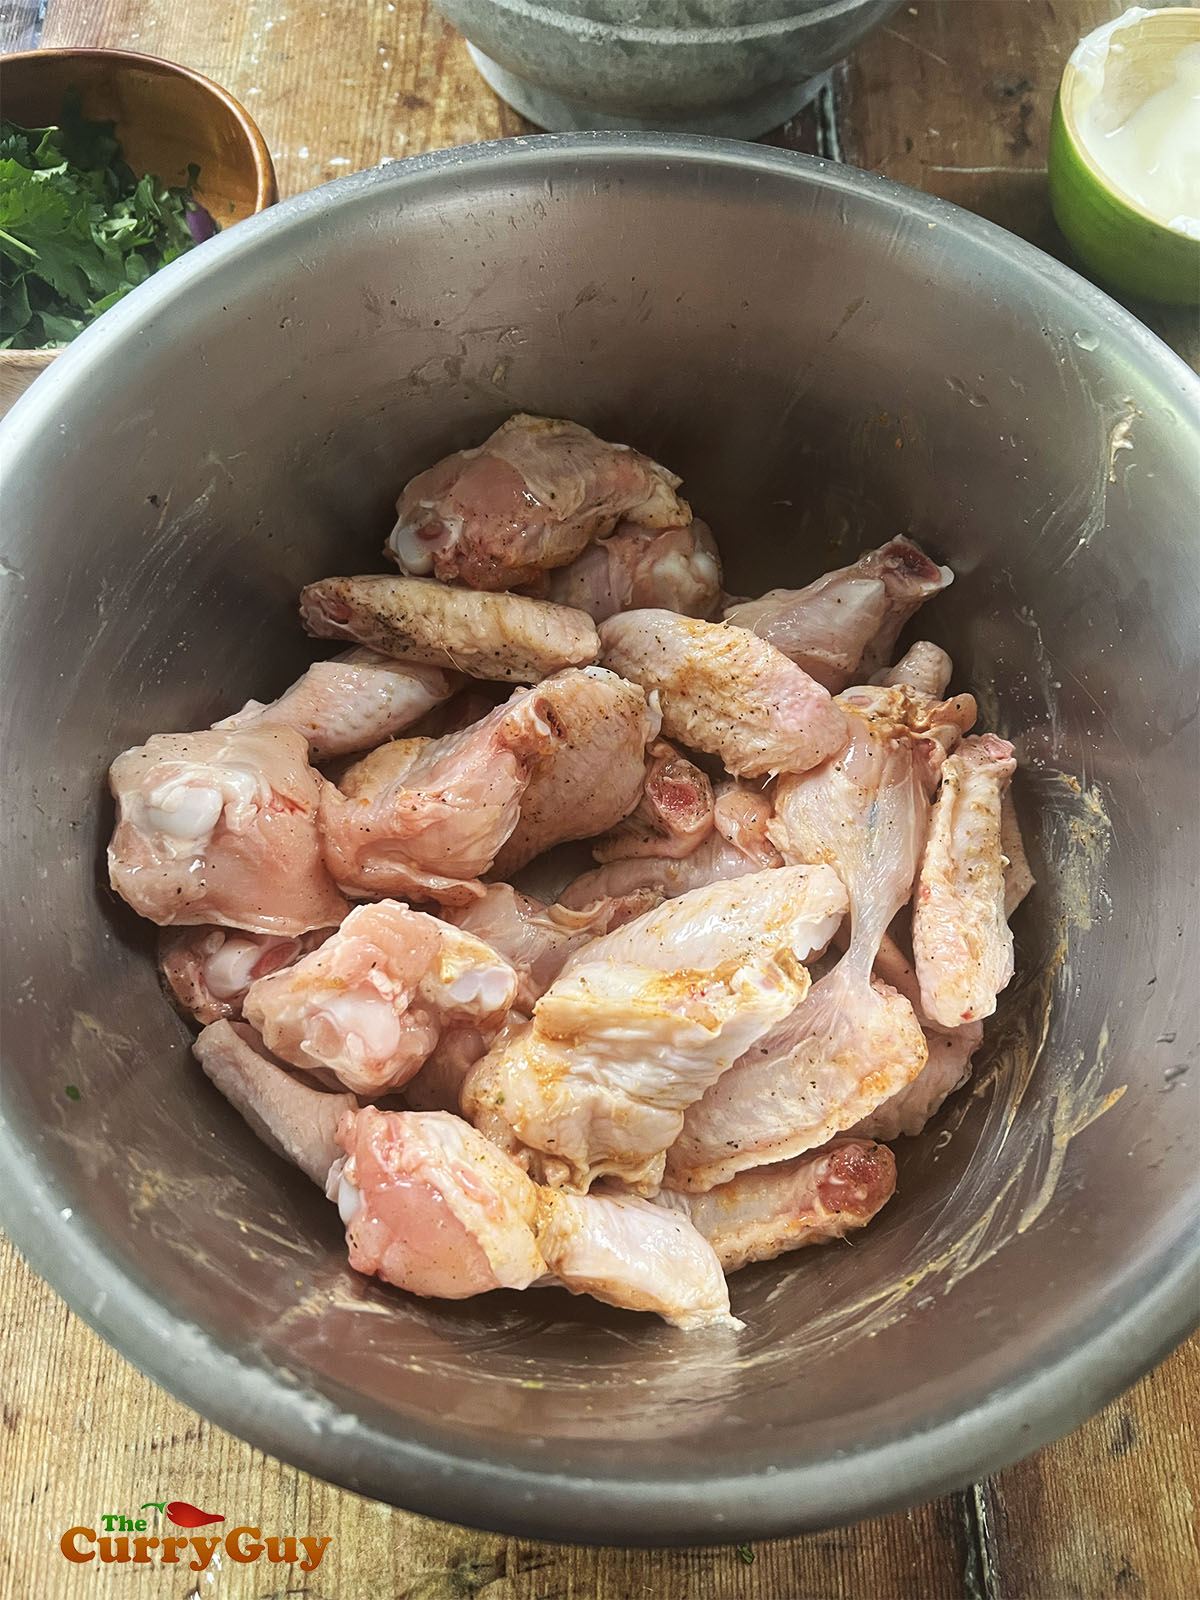 Season the chicken wings with salt and pepper, Squeeze in the juice of one lime and stir to coat.